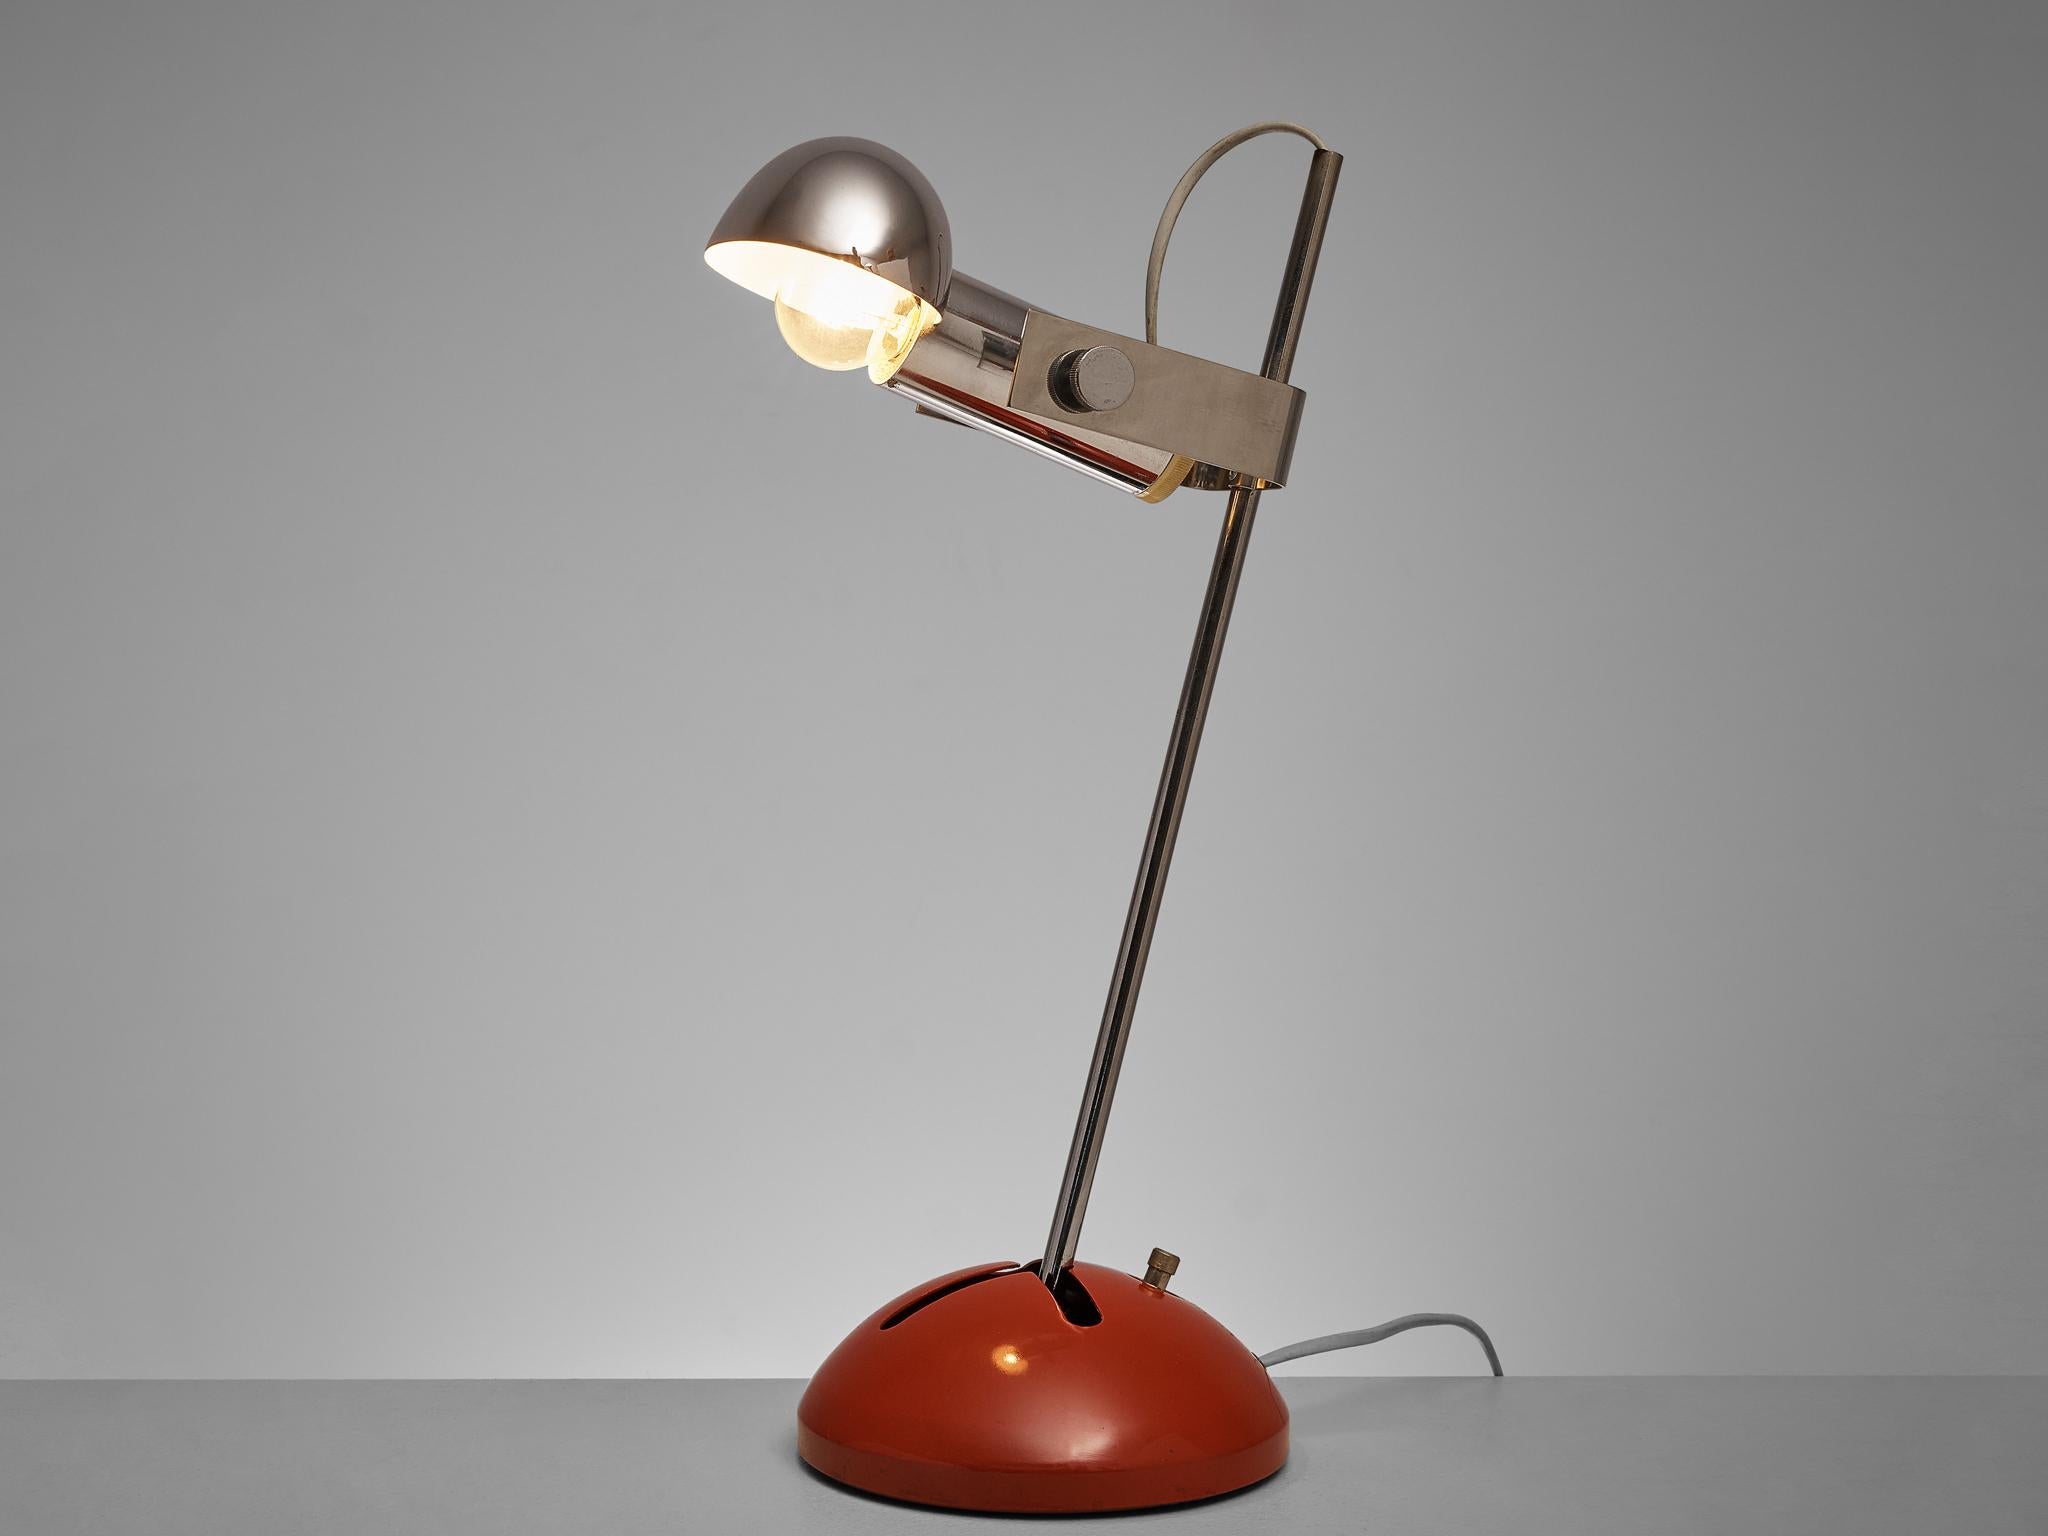 Robert Sonneman for Luci Cinisello, table lamp model 395, metal, chrome, Italy, 1970s

Introducing the versatile desk lamp model 395, a creation by Robert Sonneman for the esteemed Italian manufacturer Luci Cinisello. This lamp boasts dynamic